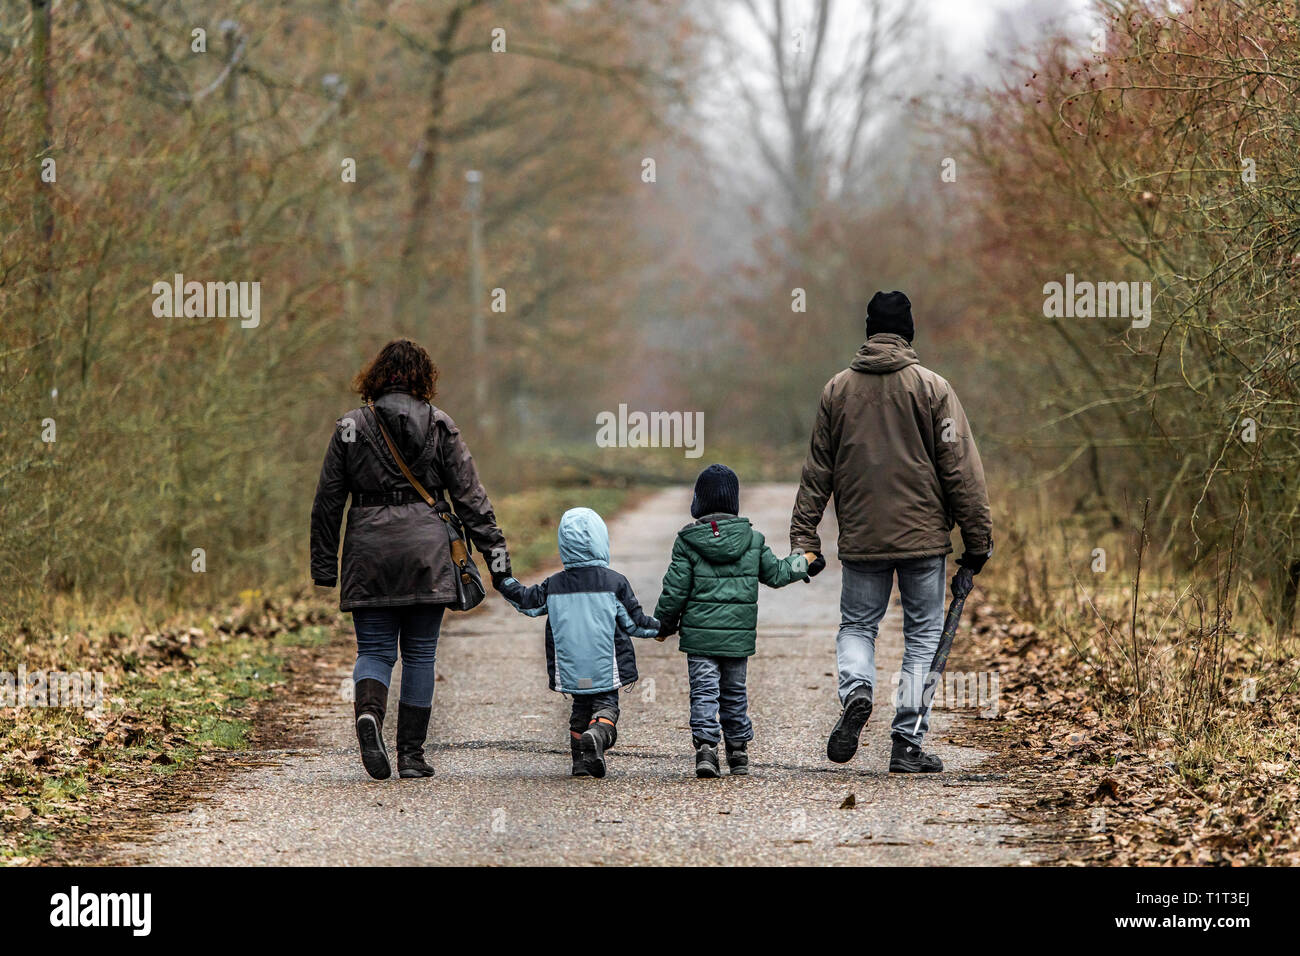 Family, mother, father, two children on a walk, Stock Photo